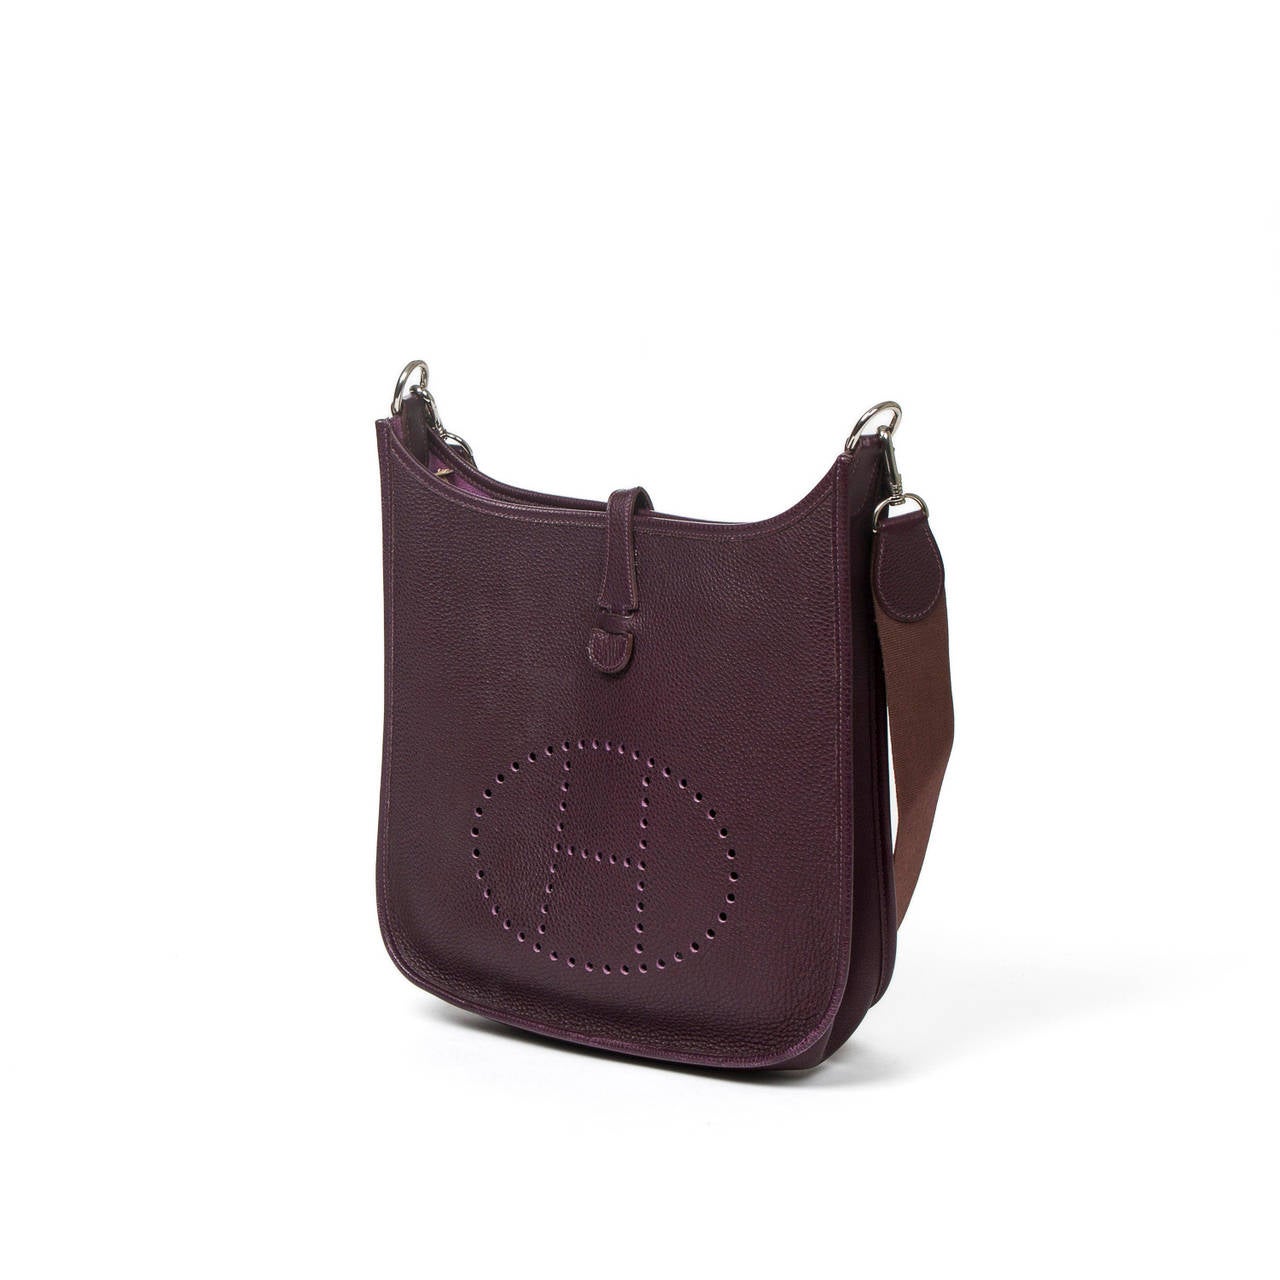 Evelyne in raisin togo leather with silver tone hardware, stamp F in square (2002).